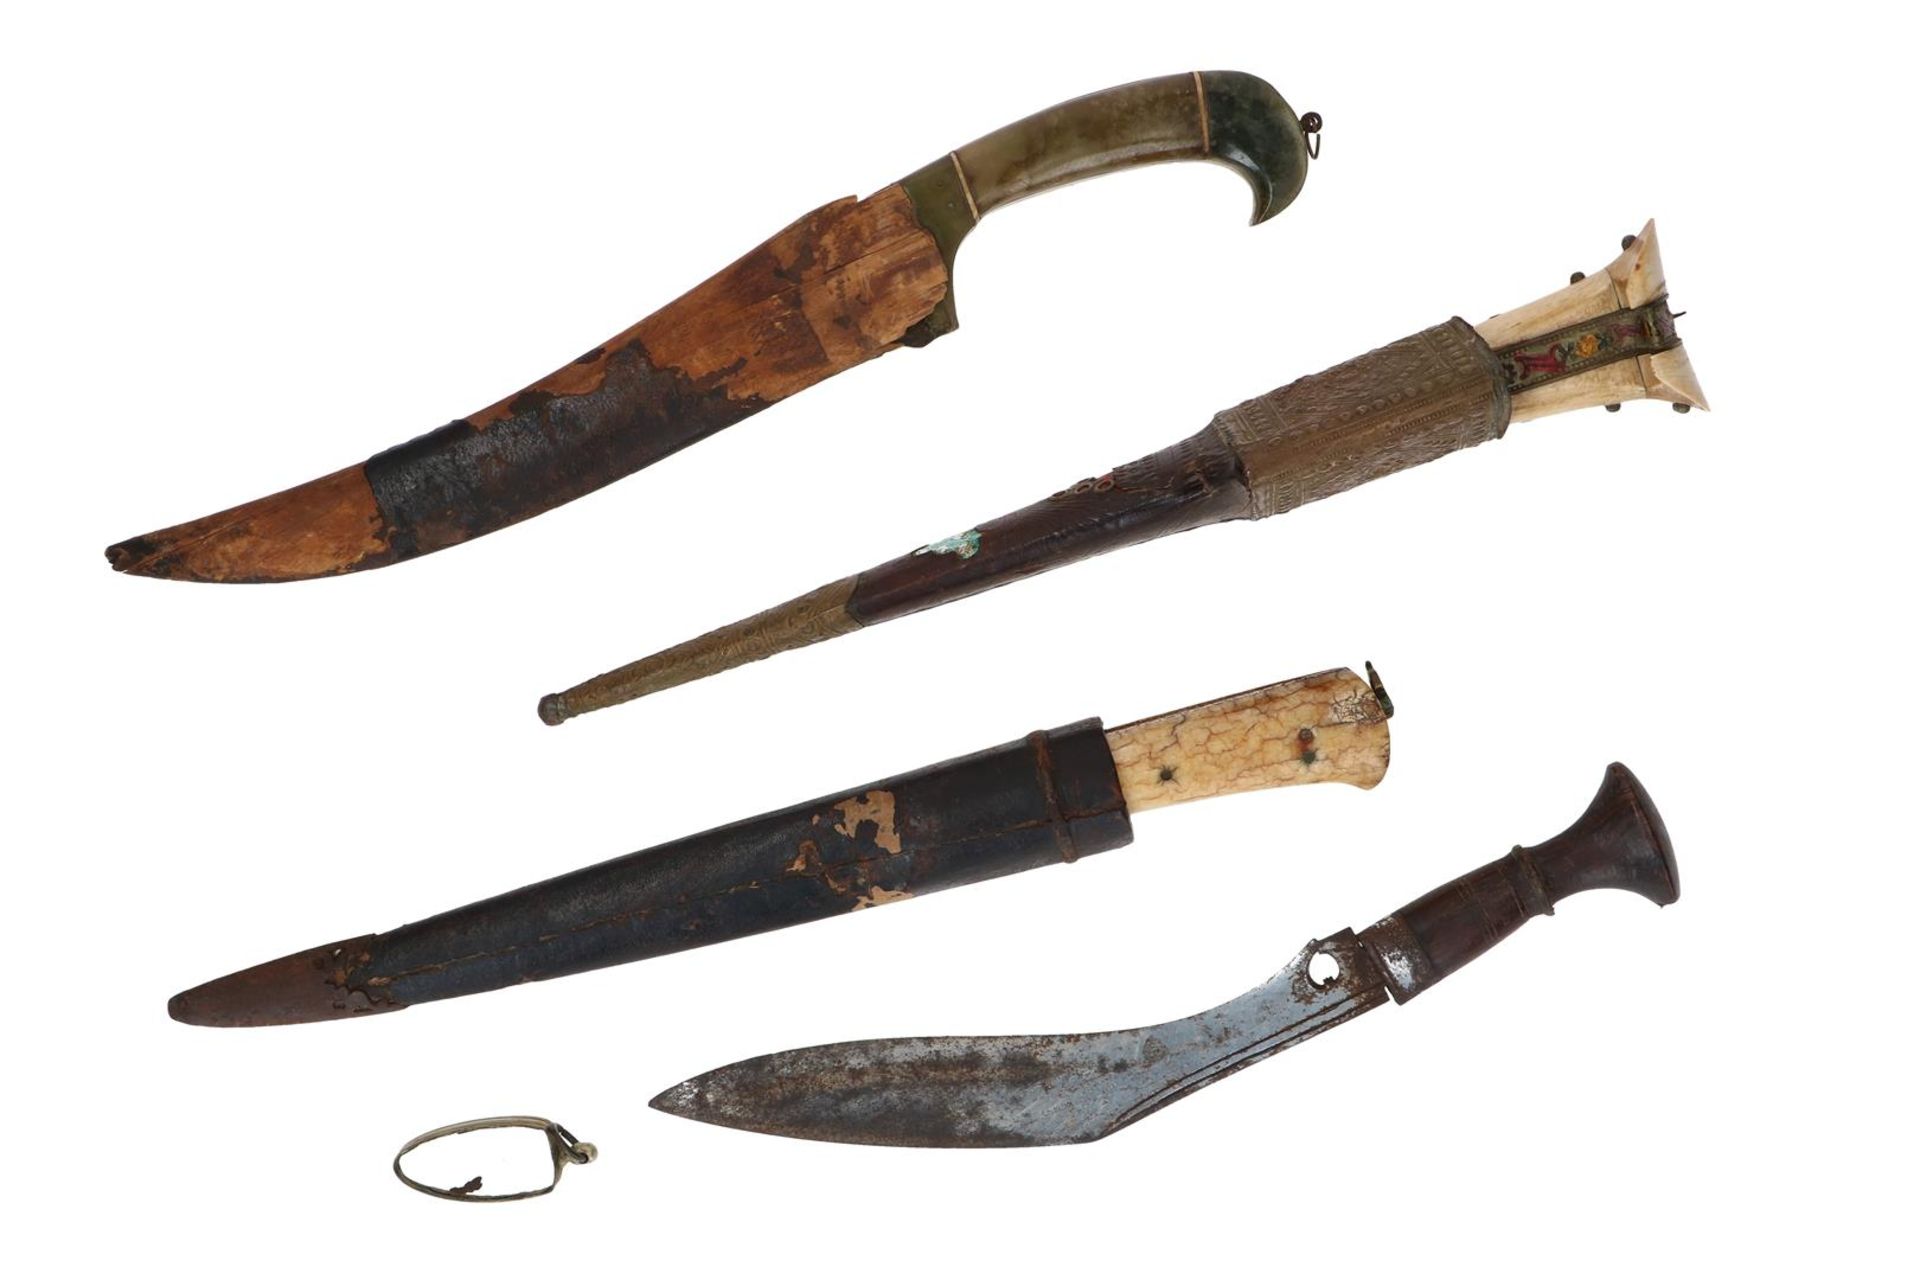 Lot of four diverse daggers, including Kadjar. The handles i.a. with ivory, gilding and jade. Three